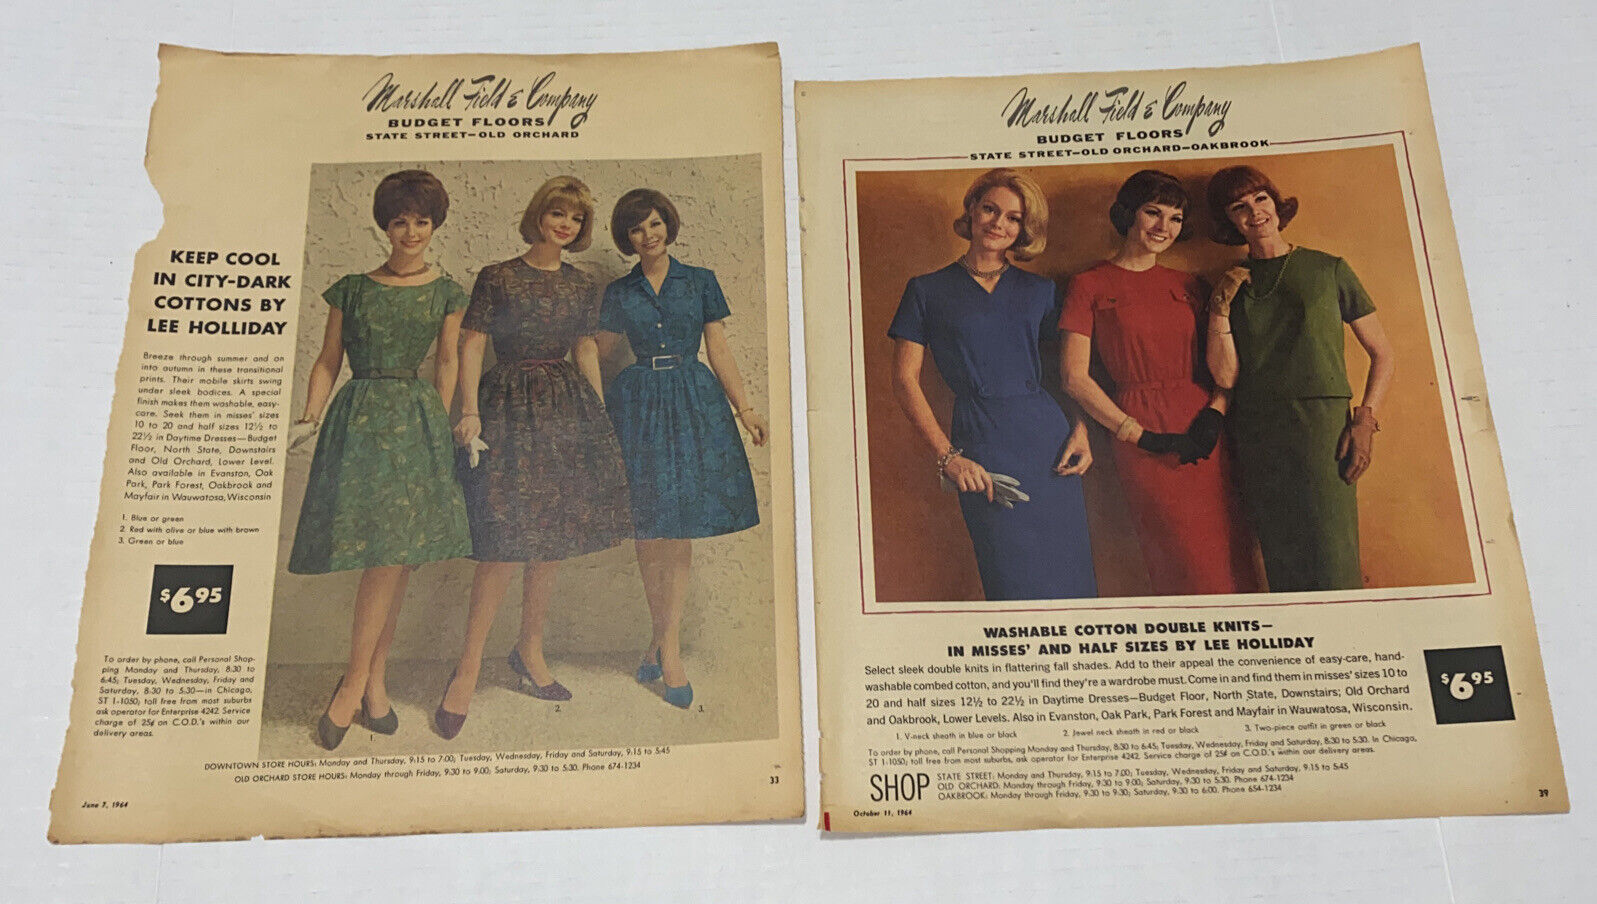 LOT #3C Vintage 1960s Lee Holiday Marshall Field Print ADS Womens Fashion Prop